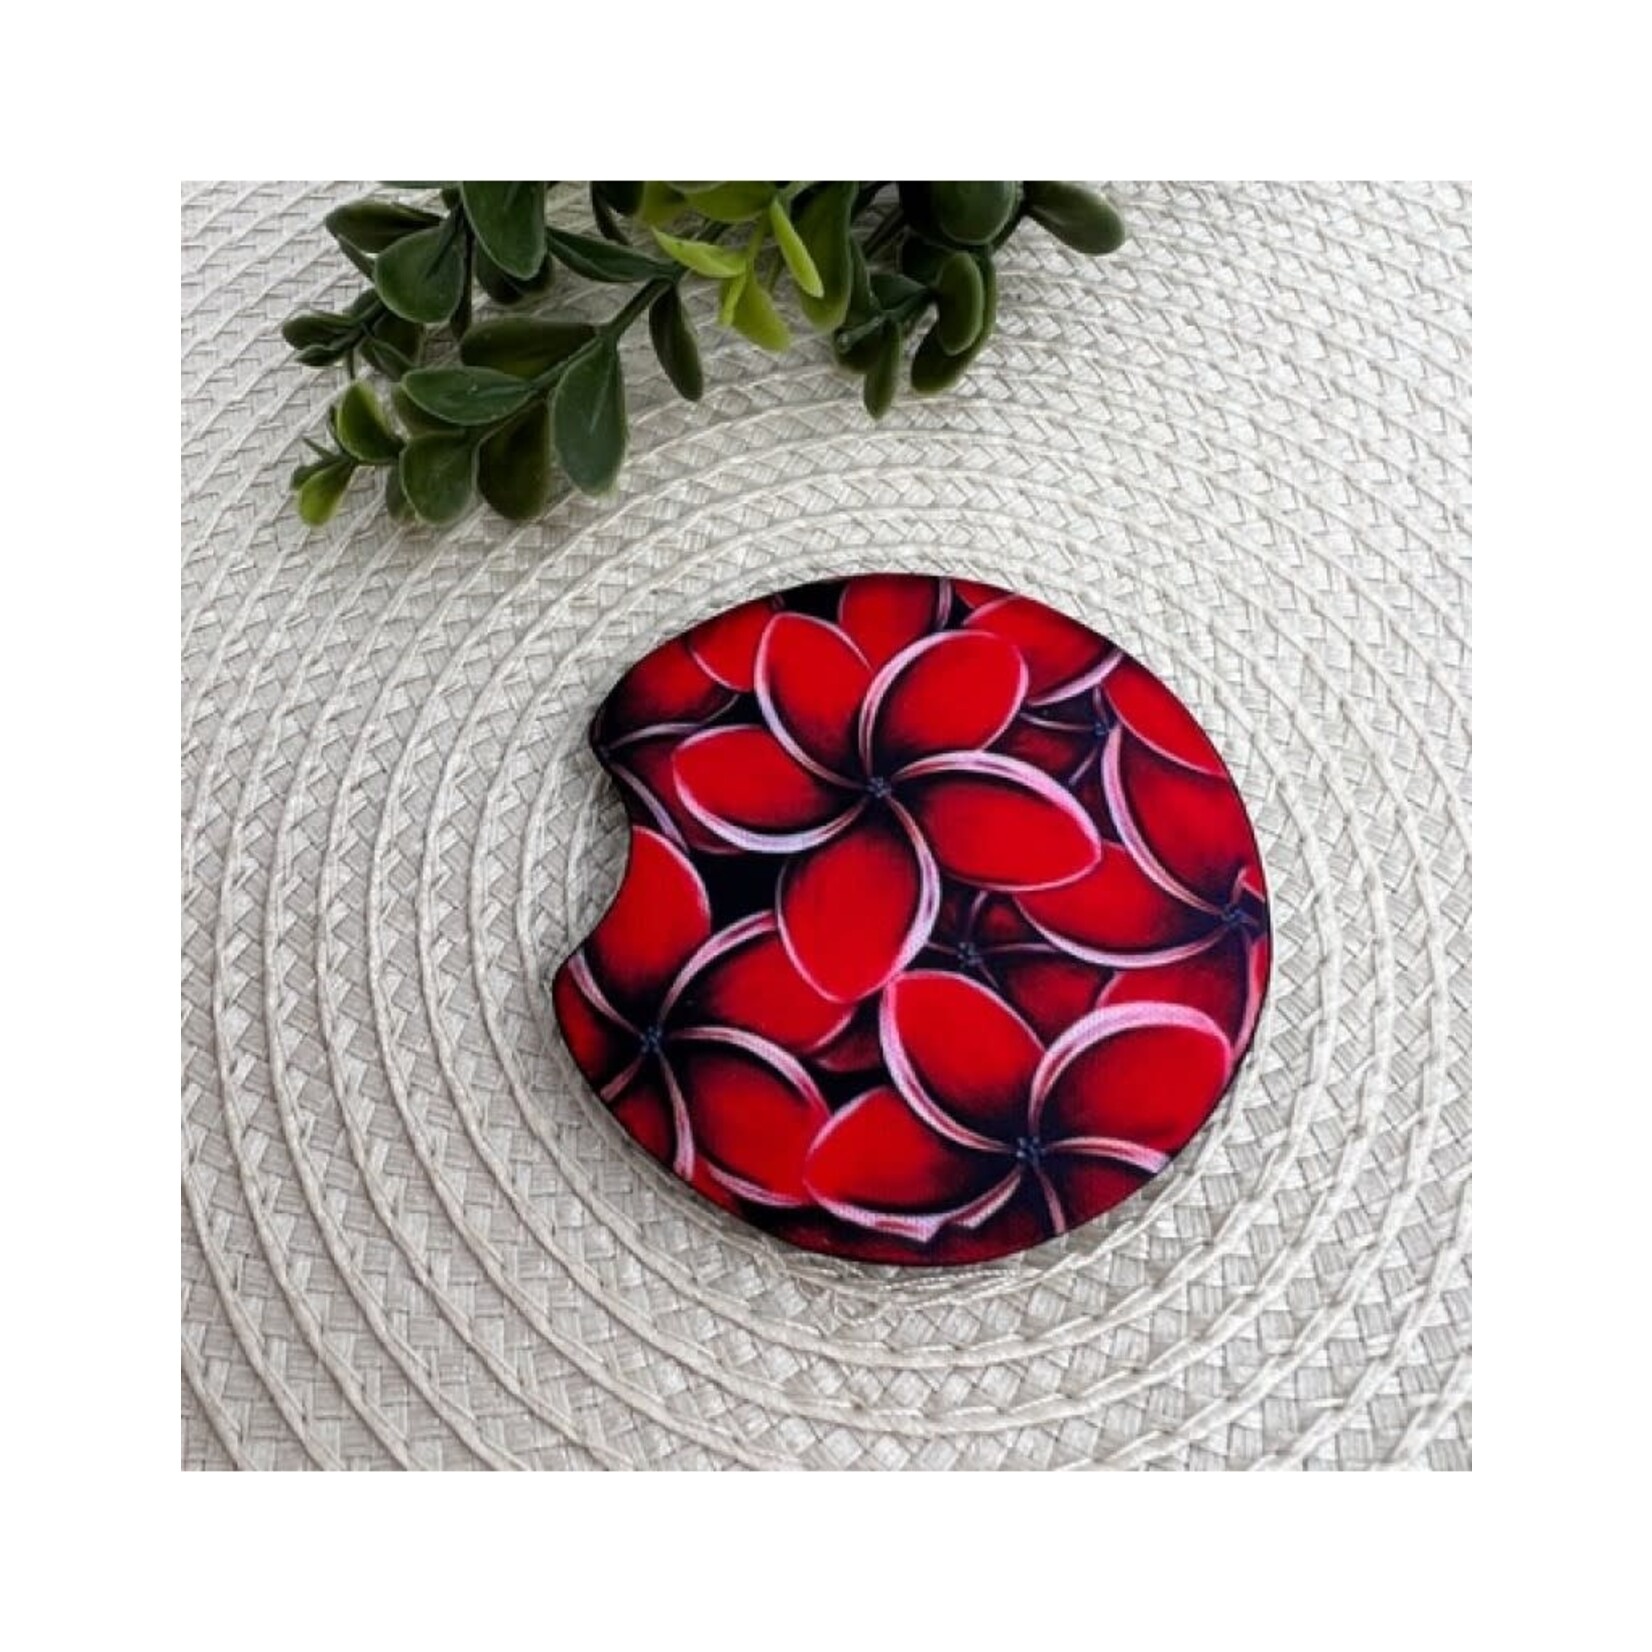 Denise Cassidy Wood Collection Car Coaster - Denise Cassidy Wood Collection